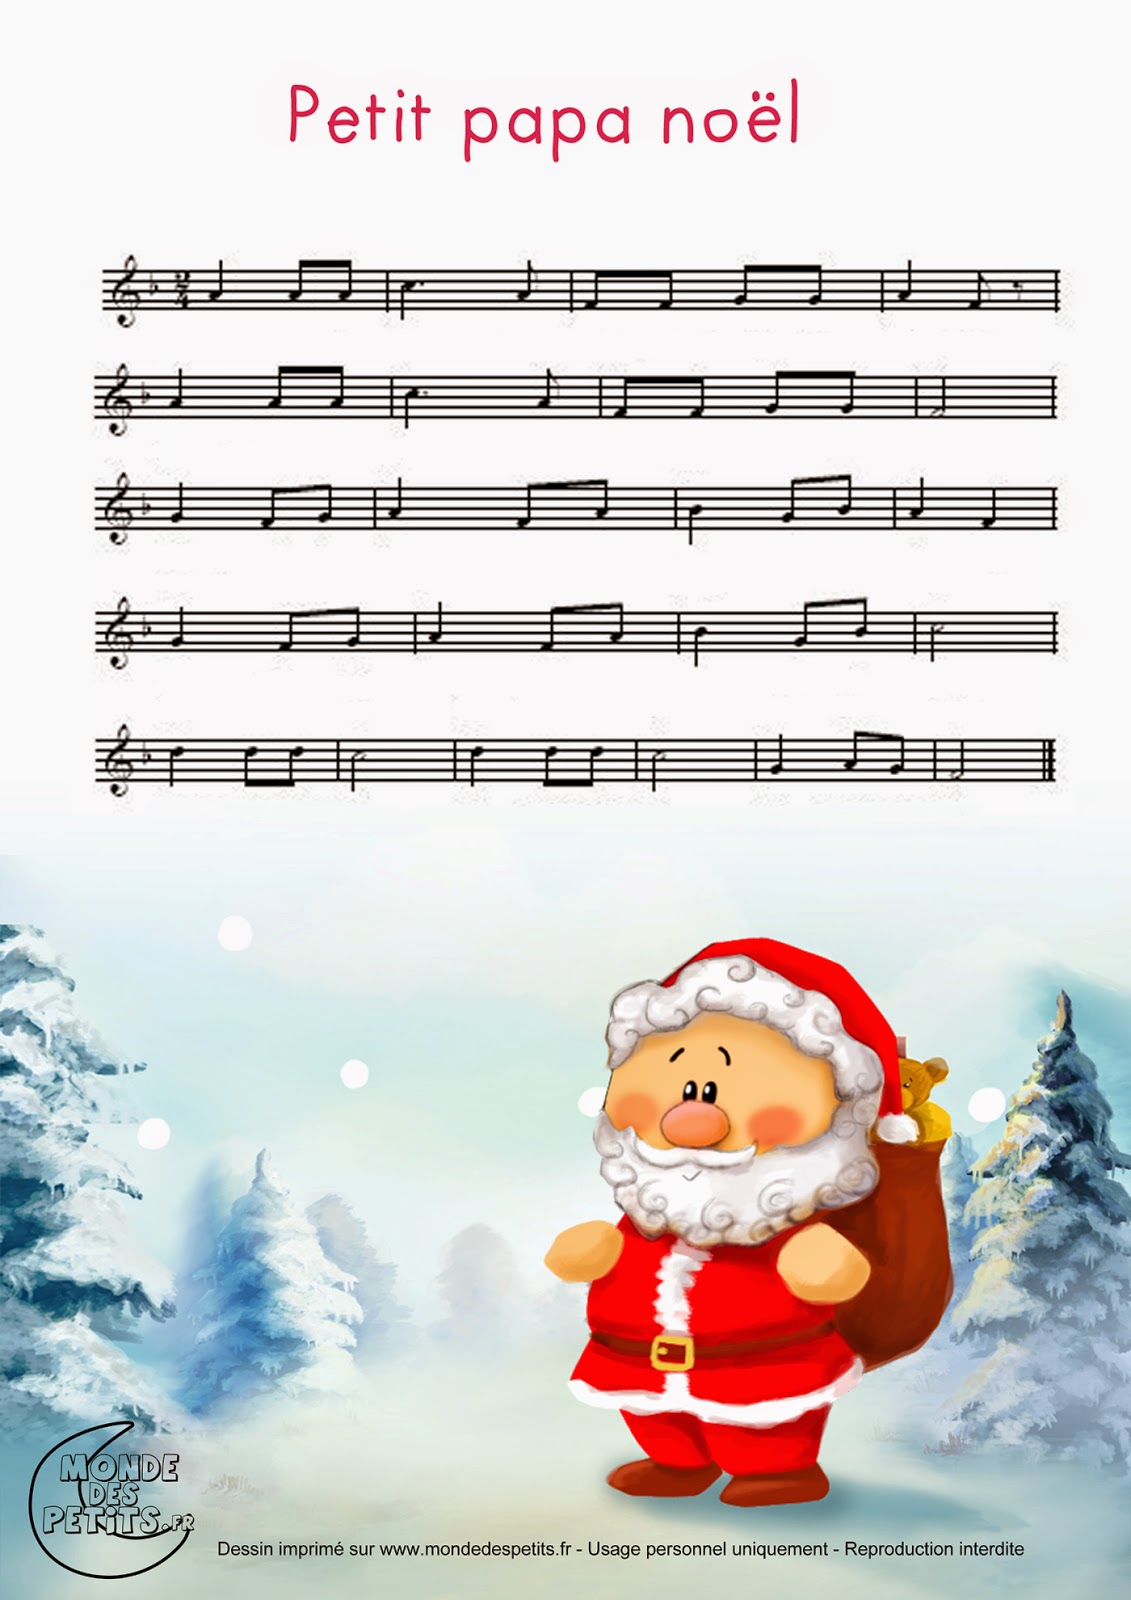 Learn&Play - Histoires de pompoms wish you a Merry Christmas with the French christmas song ...